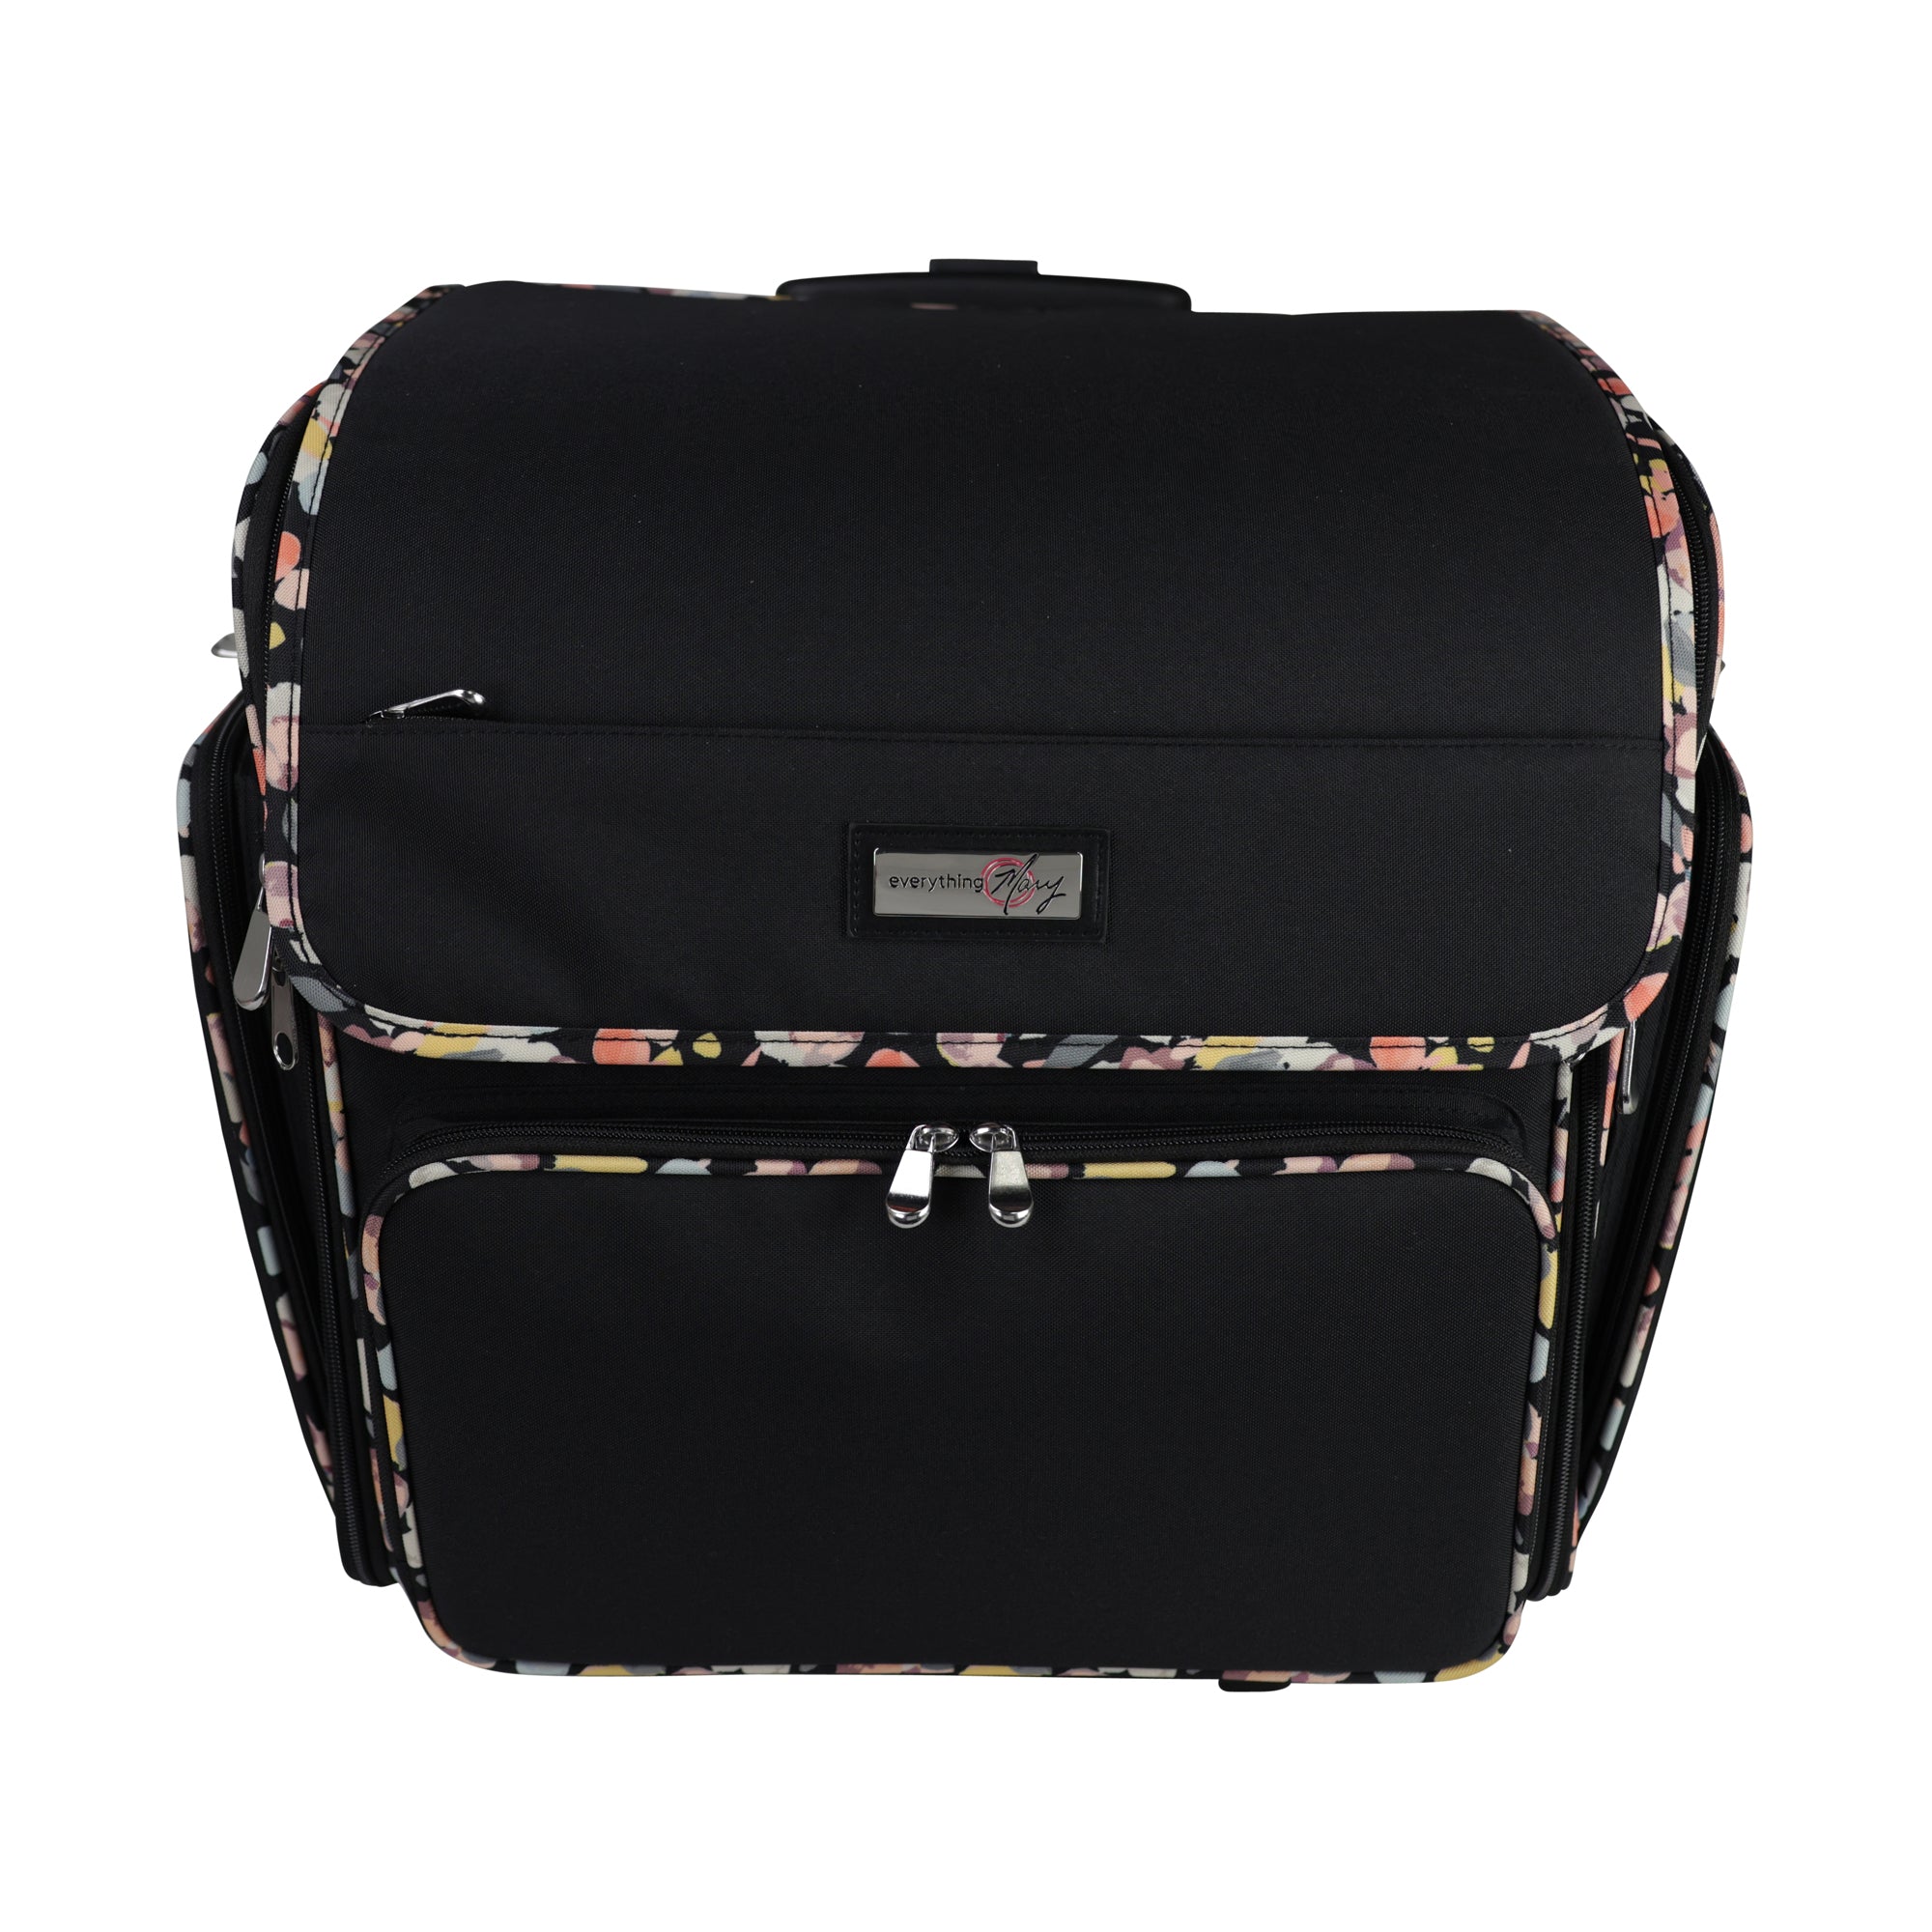 Everything Mary Deluxe Collapsible Rolling Craft Case, Black Quilted - Scrapbook Tote Bag w/Wheels for Scrapbooking & Art